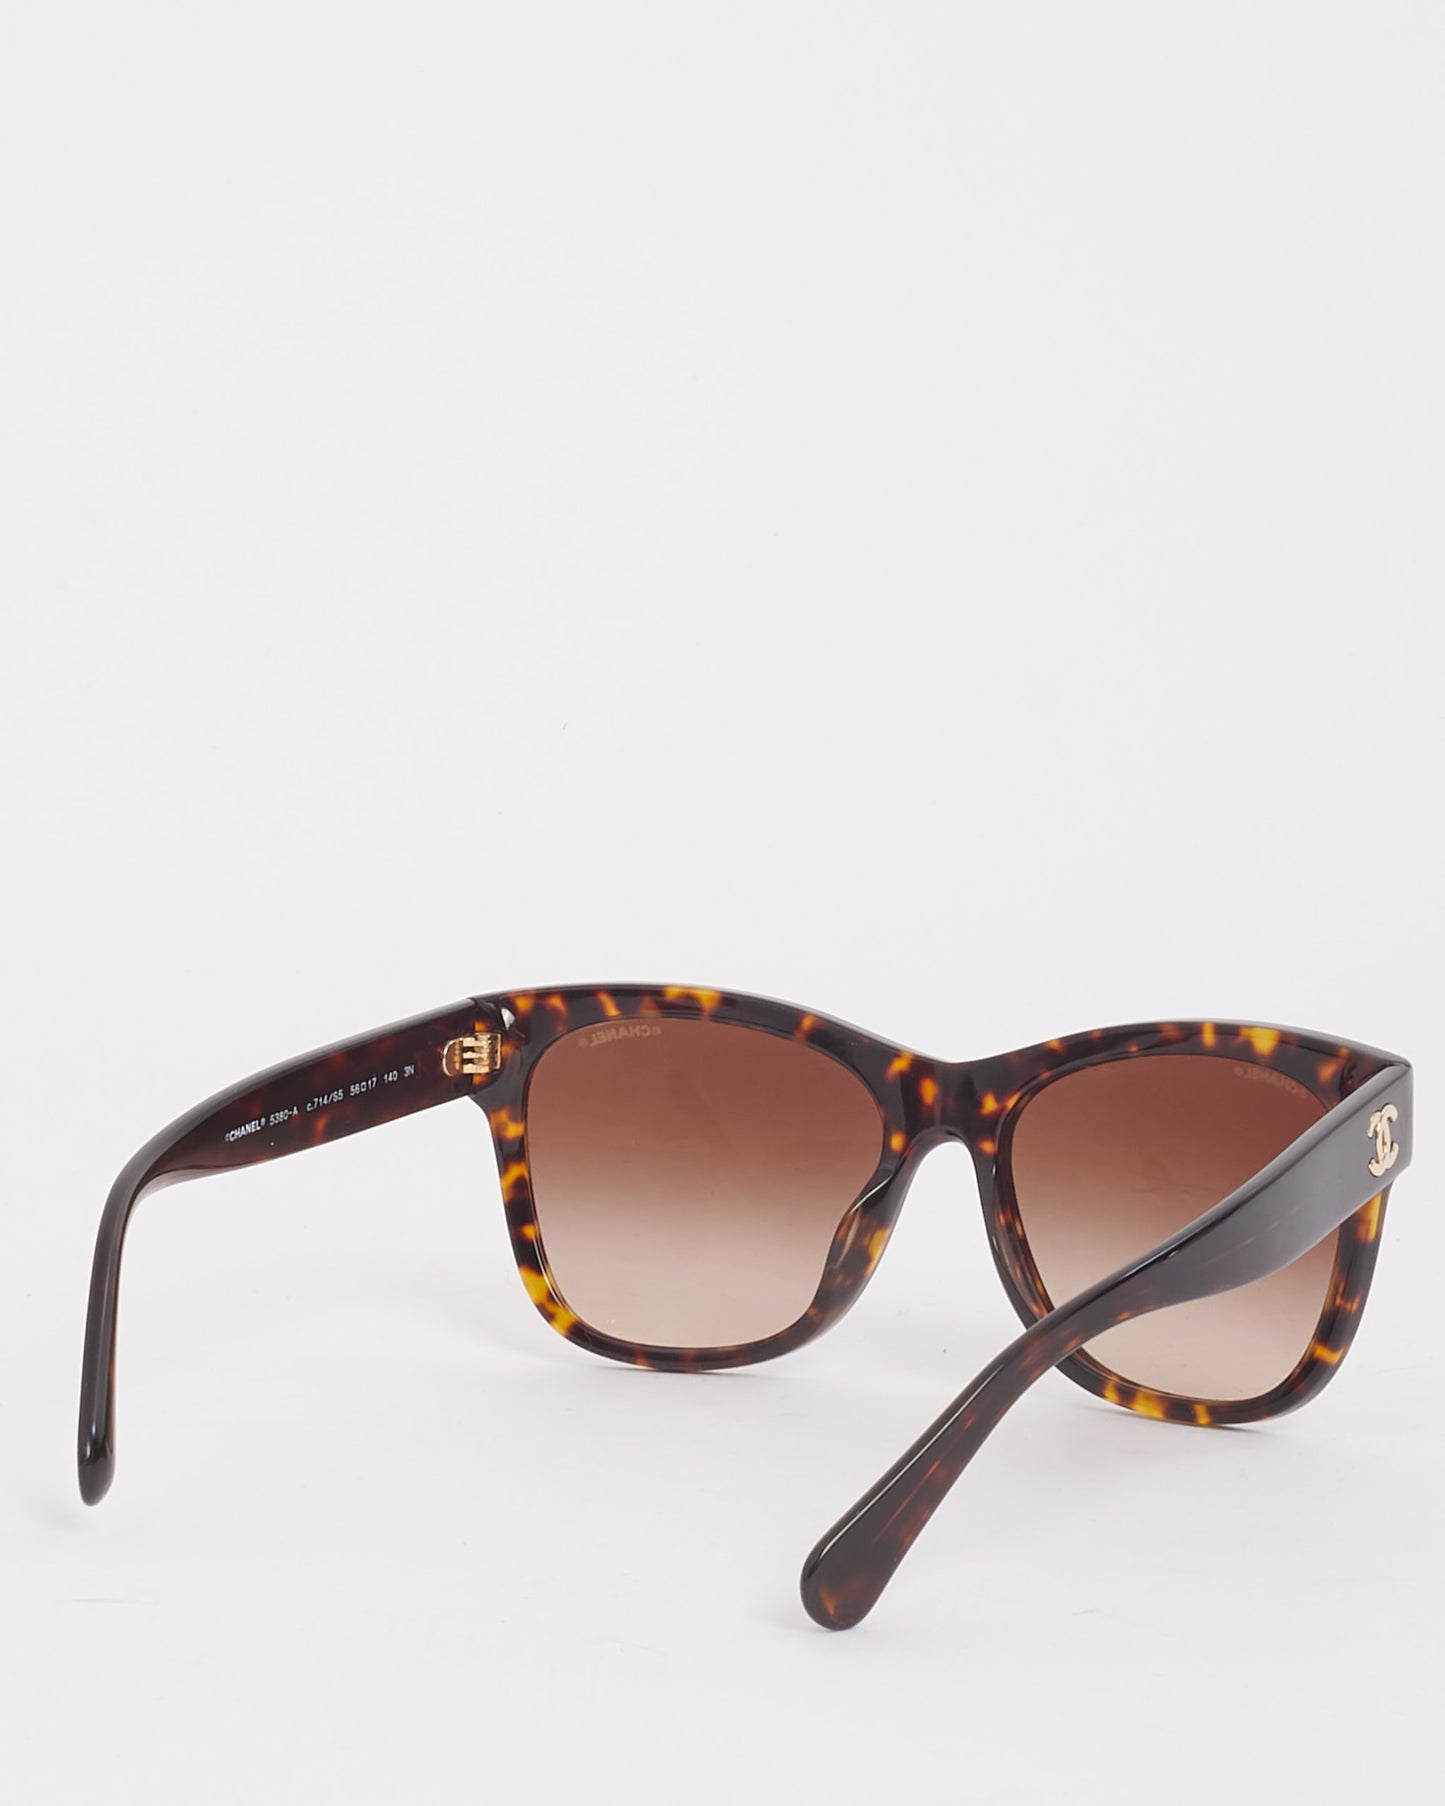 Chanel Brown Tortoise Acetate Butterfly 5380 Sunglasses